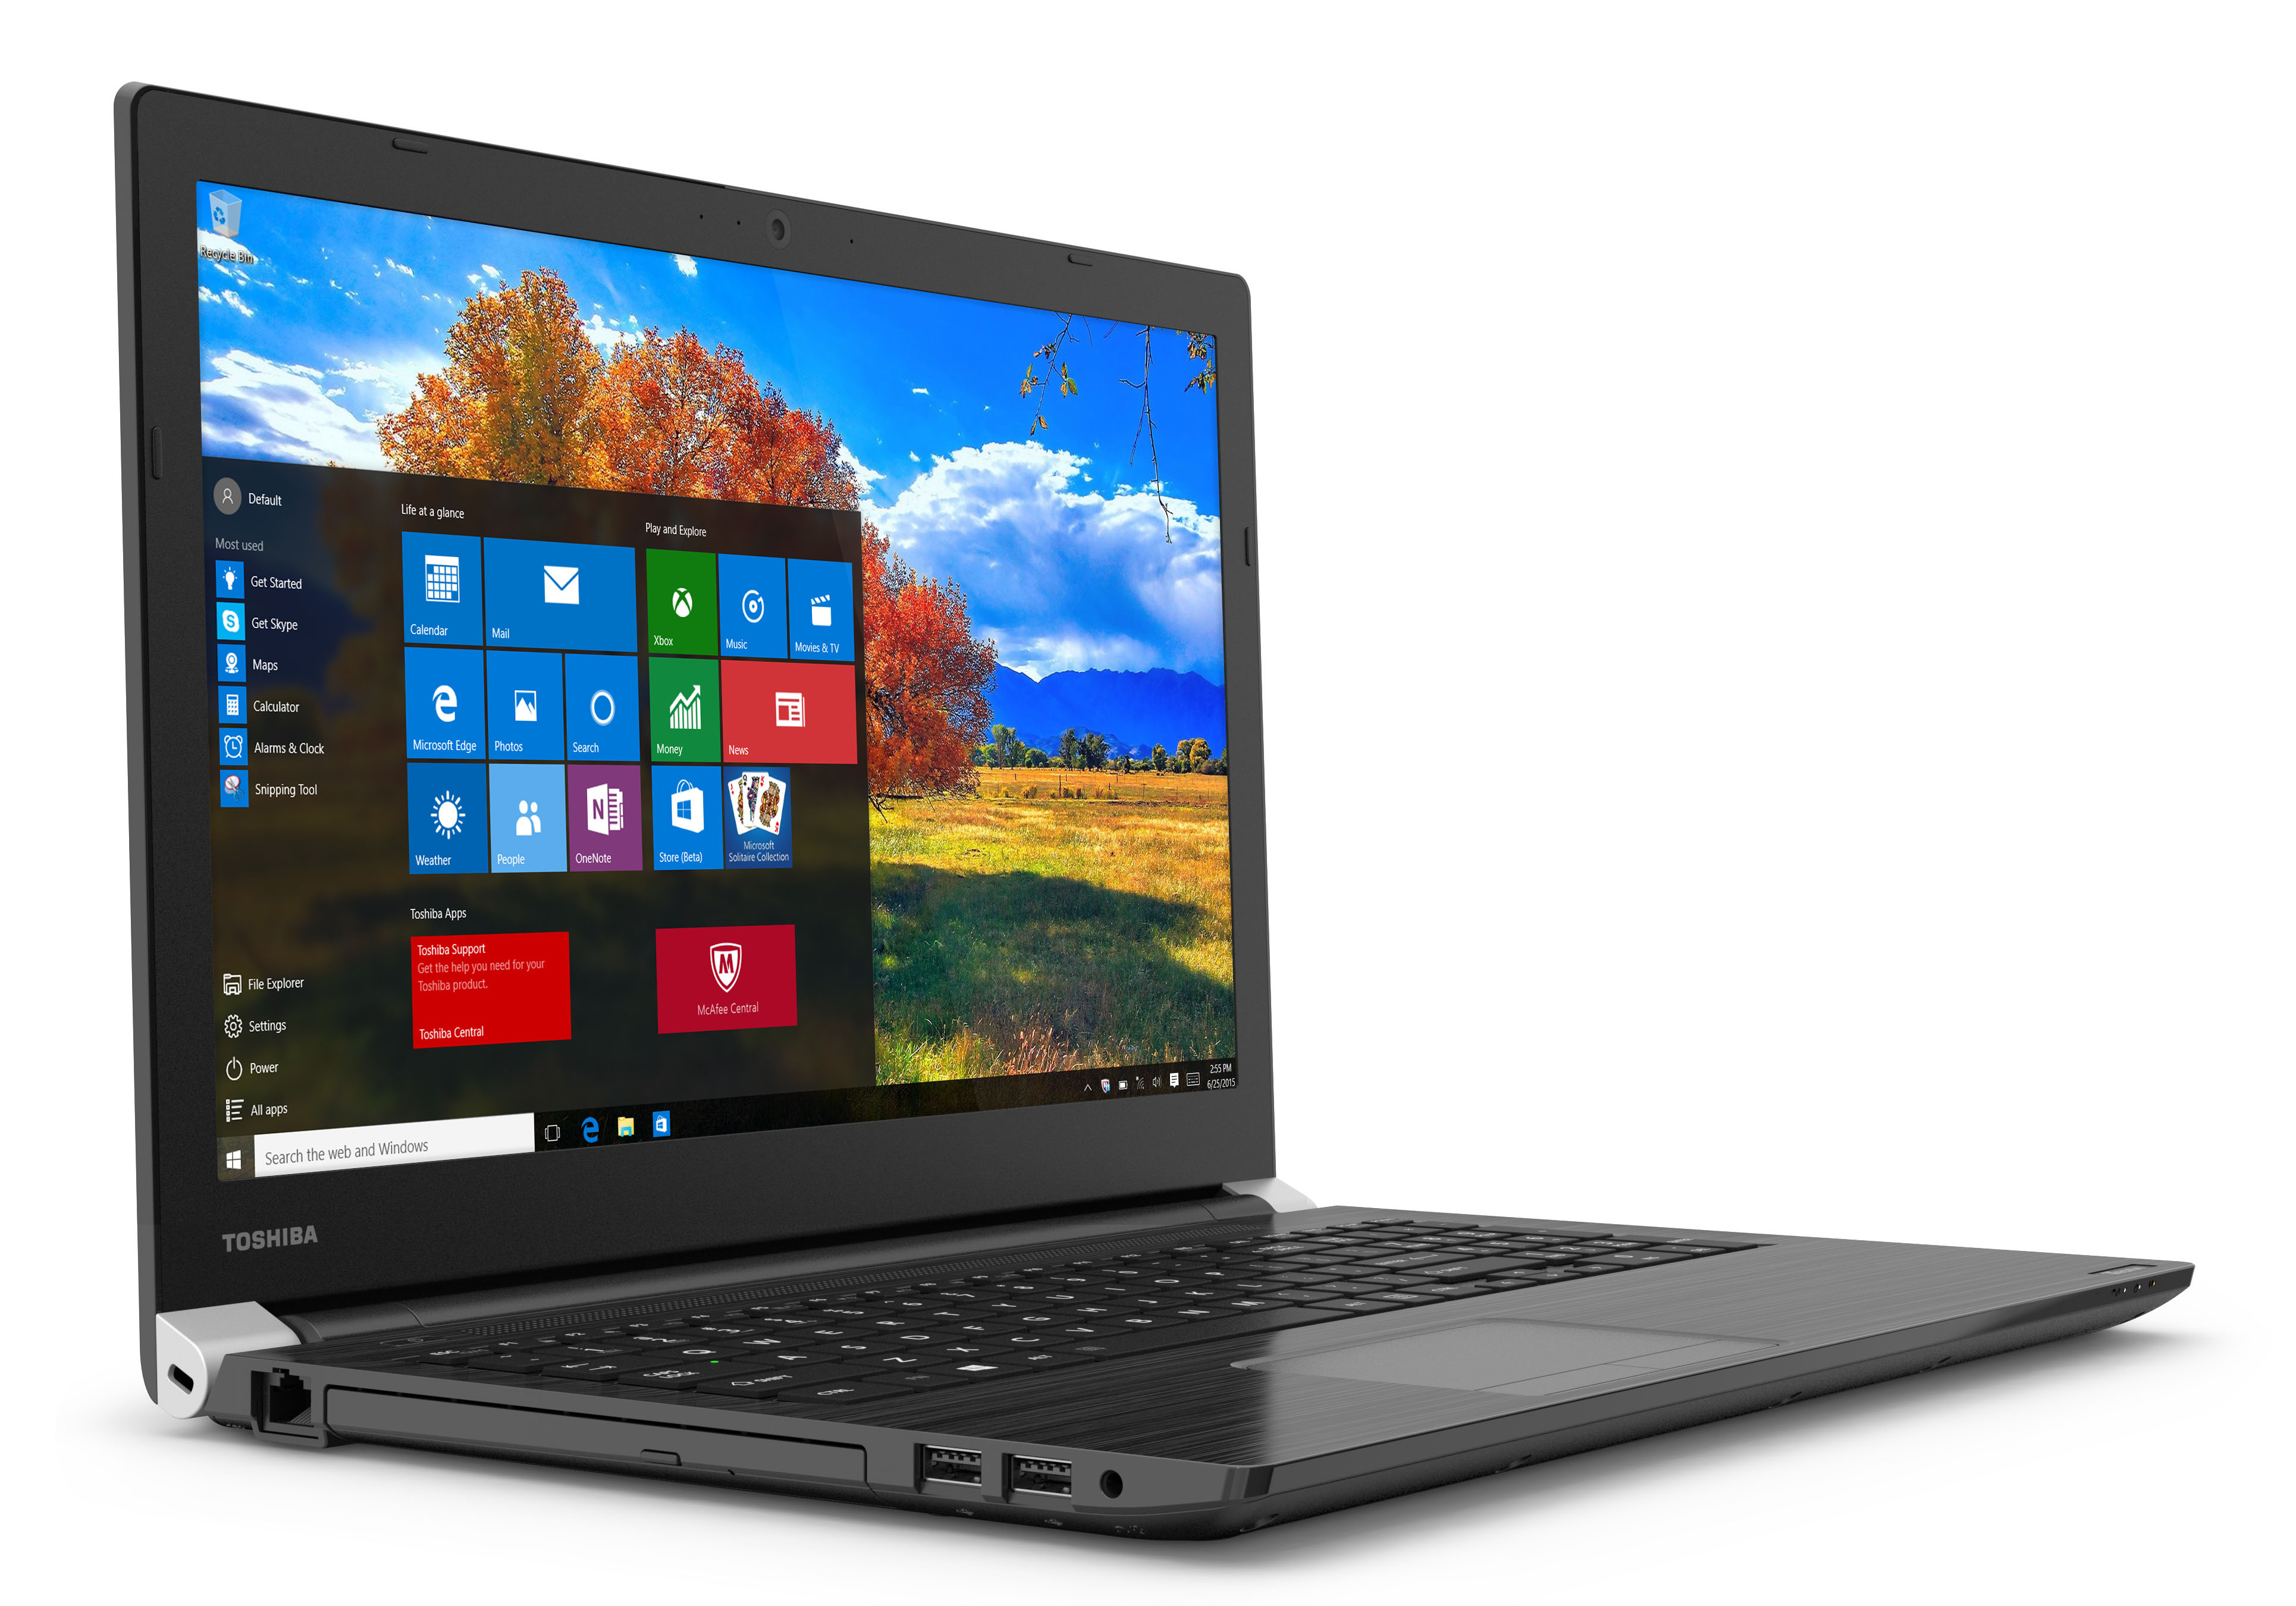 Toshiba Expands SMB Offering with New Windows 10 Ready Laptop | techPowerUp